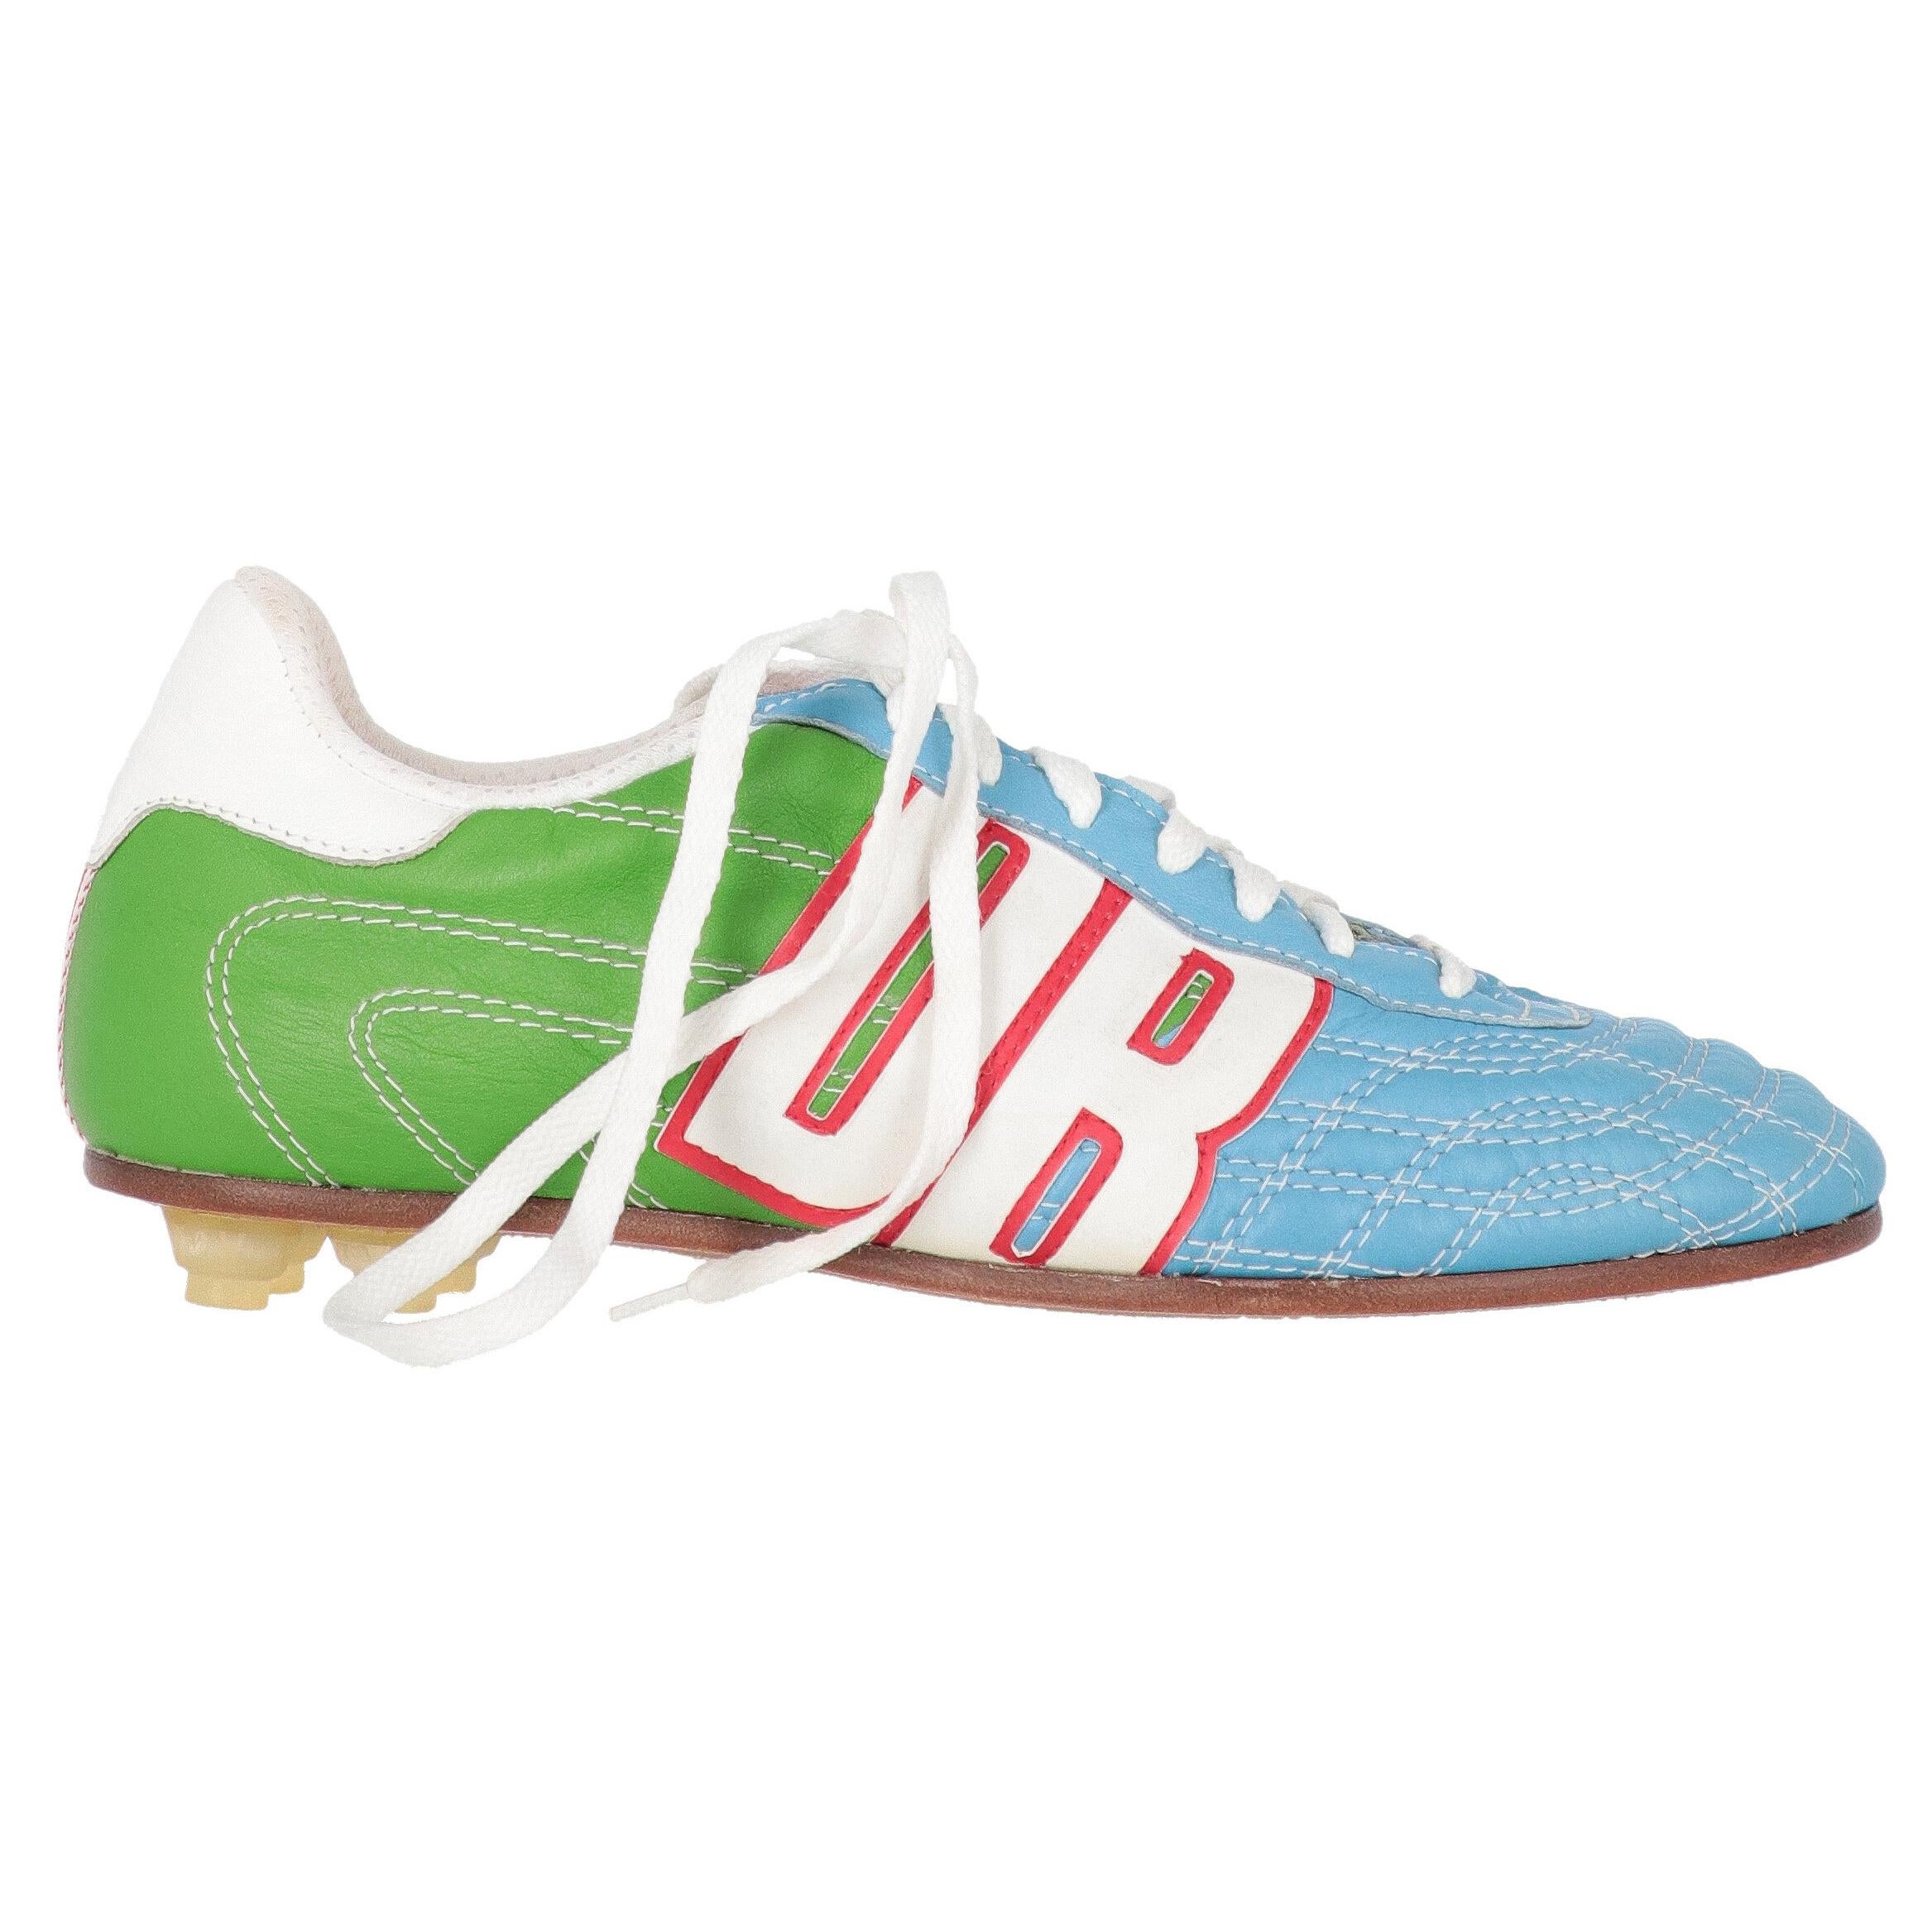 2010s Dirk Bikkembergs Leather Lace-up Shoes at 1stDibs | bikkembergs  soccer shoes, bikkembergs football boots, dirk bikkembergs sneakers